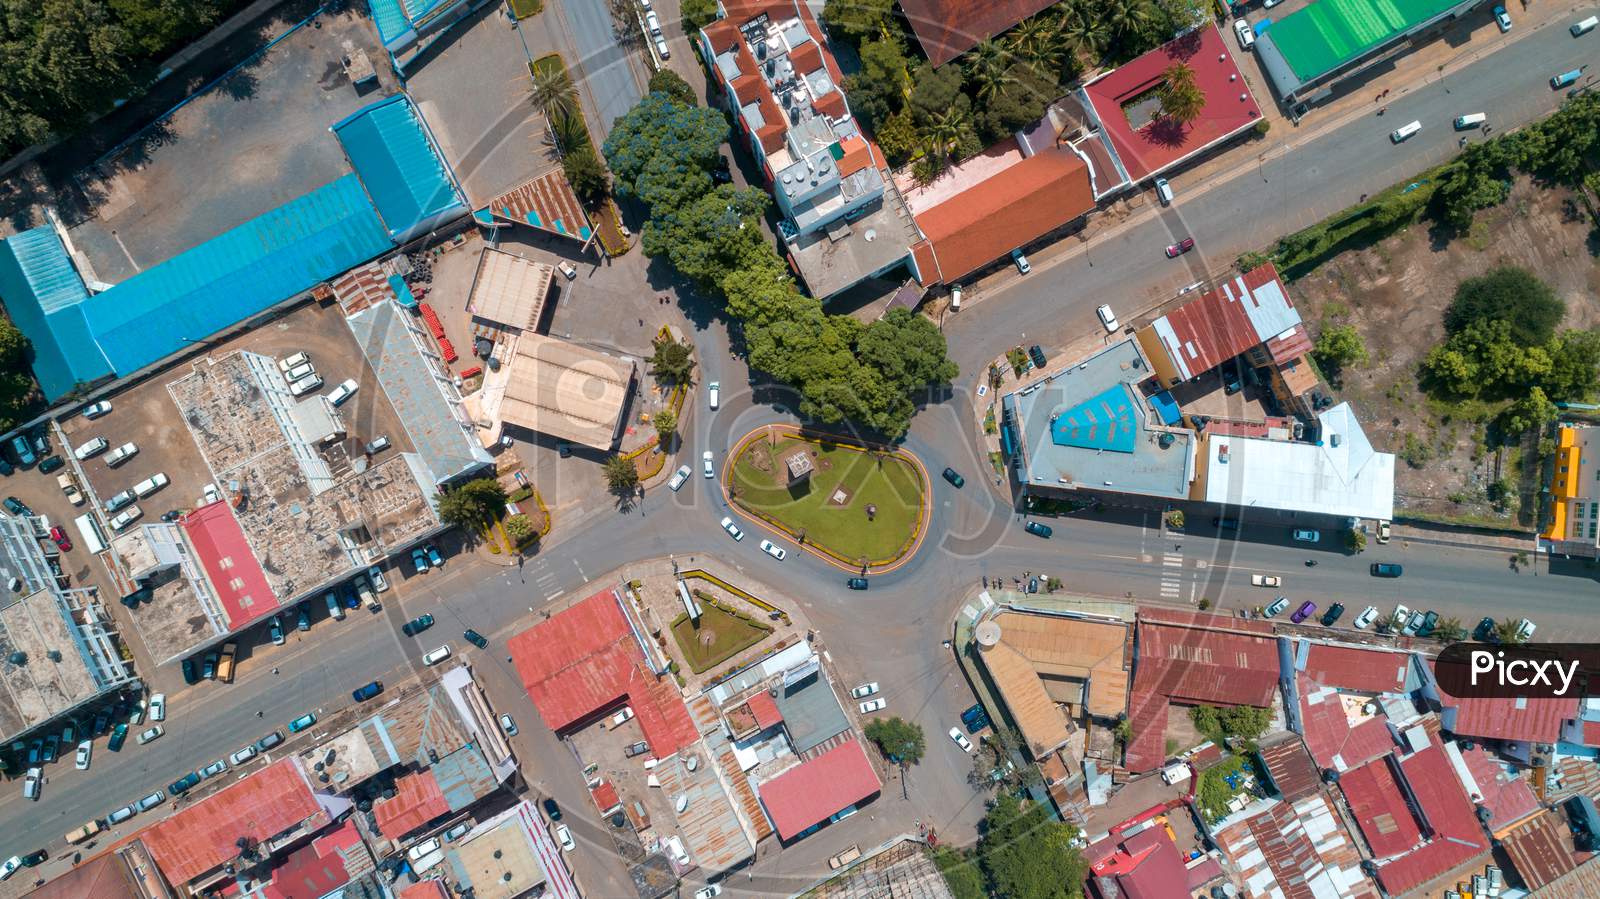 Aerial View Of The City Of Arusha, Tanzania